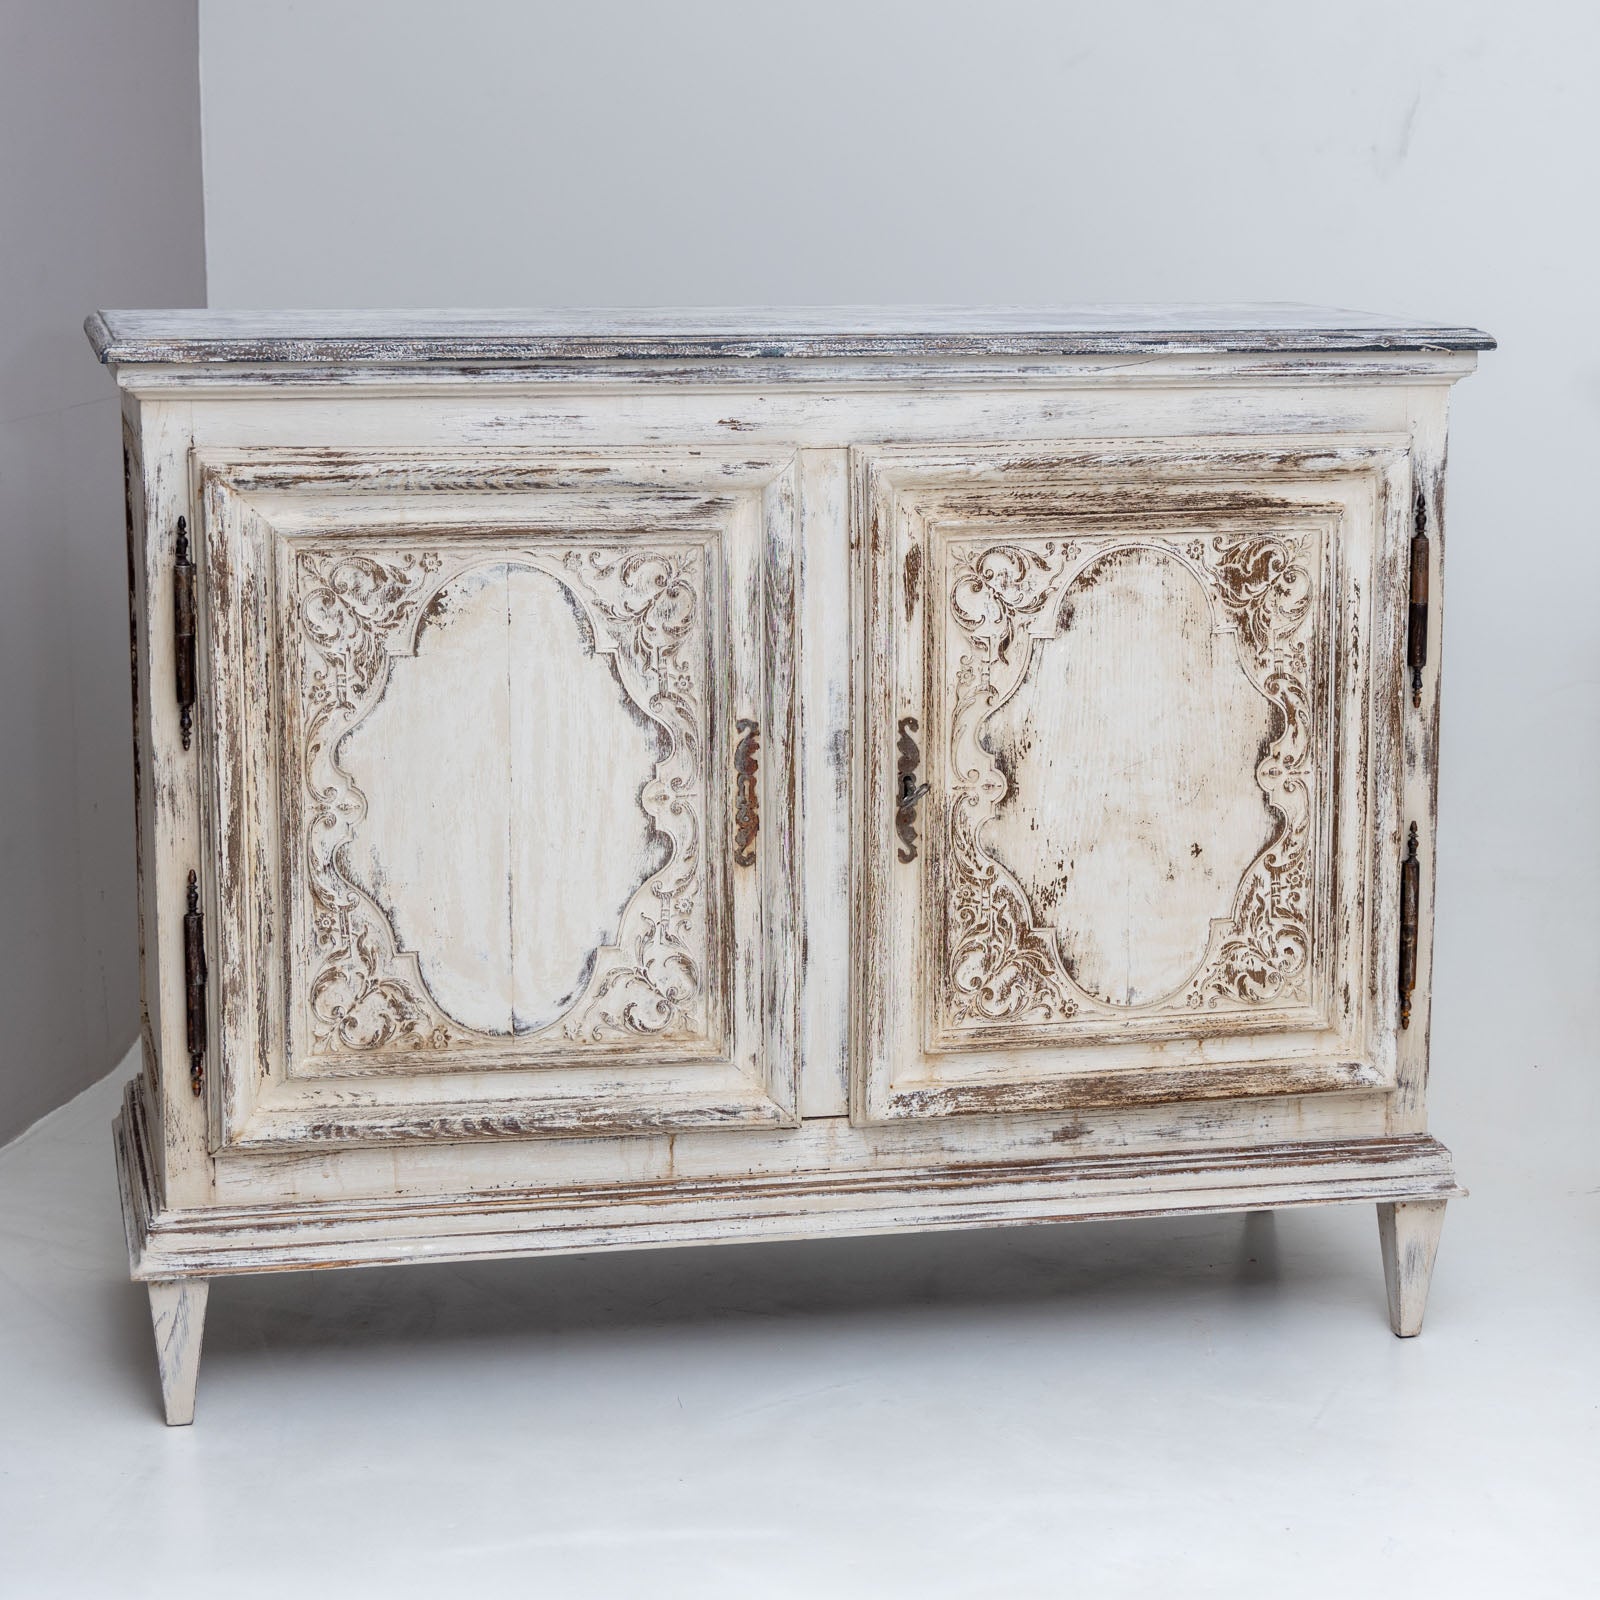 Pair of two-door sideboards made of solid walnut. The buffets stand on square tapered feet and the body is decorated with profiled moldings and panels with carved vine decoration and curved medallions. The sideboards were repainted in creamy white